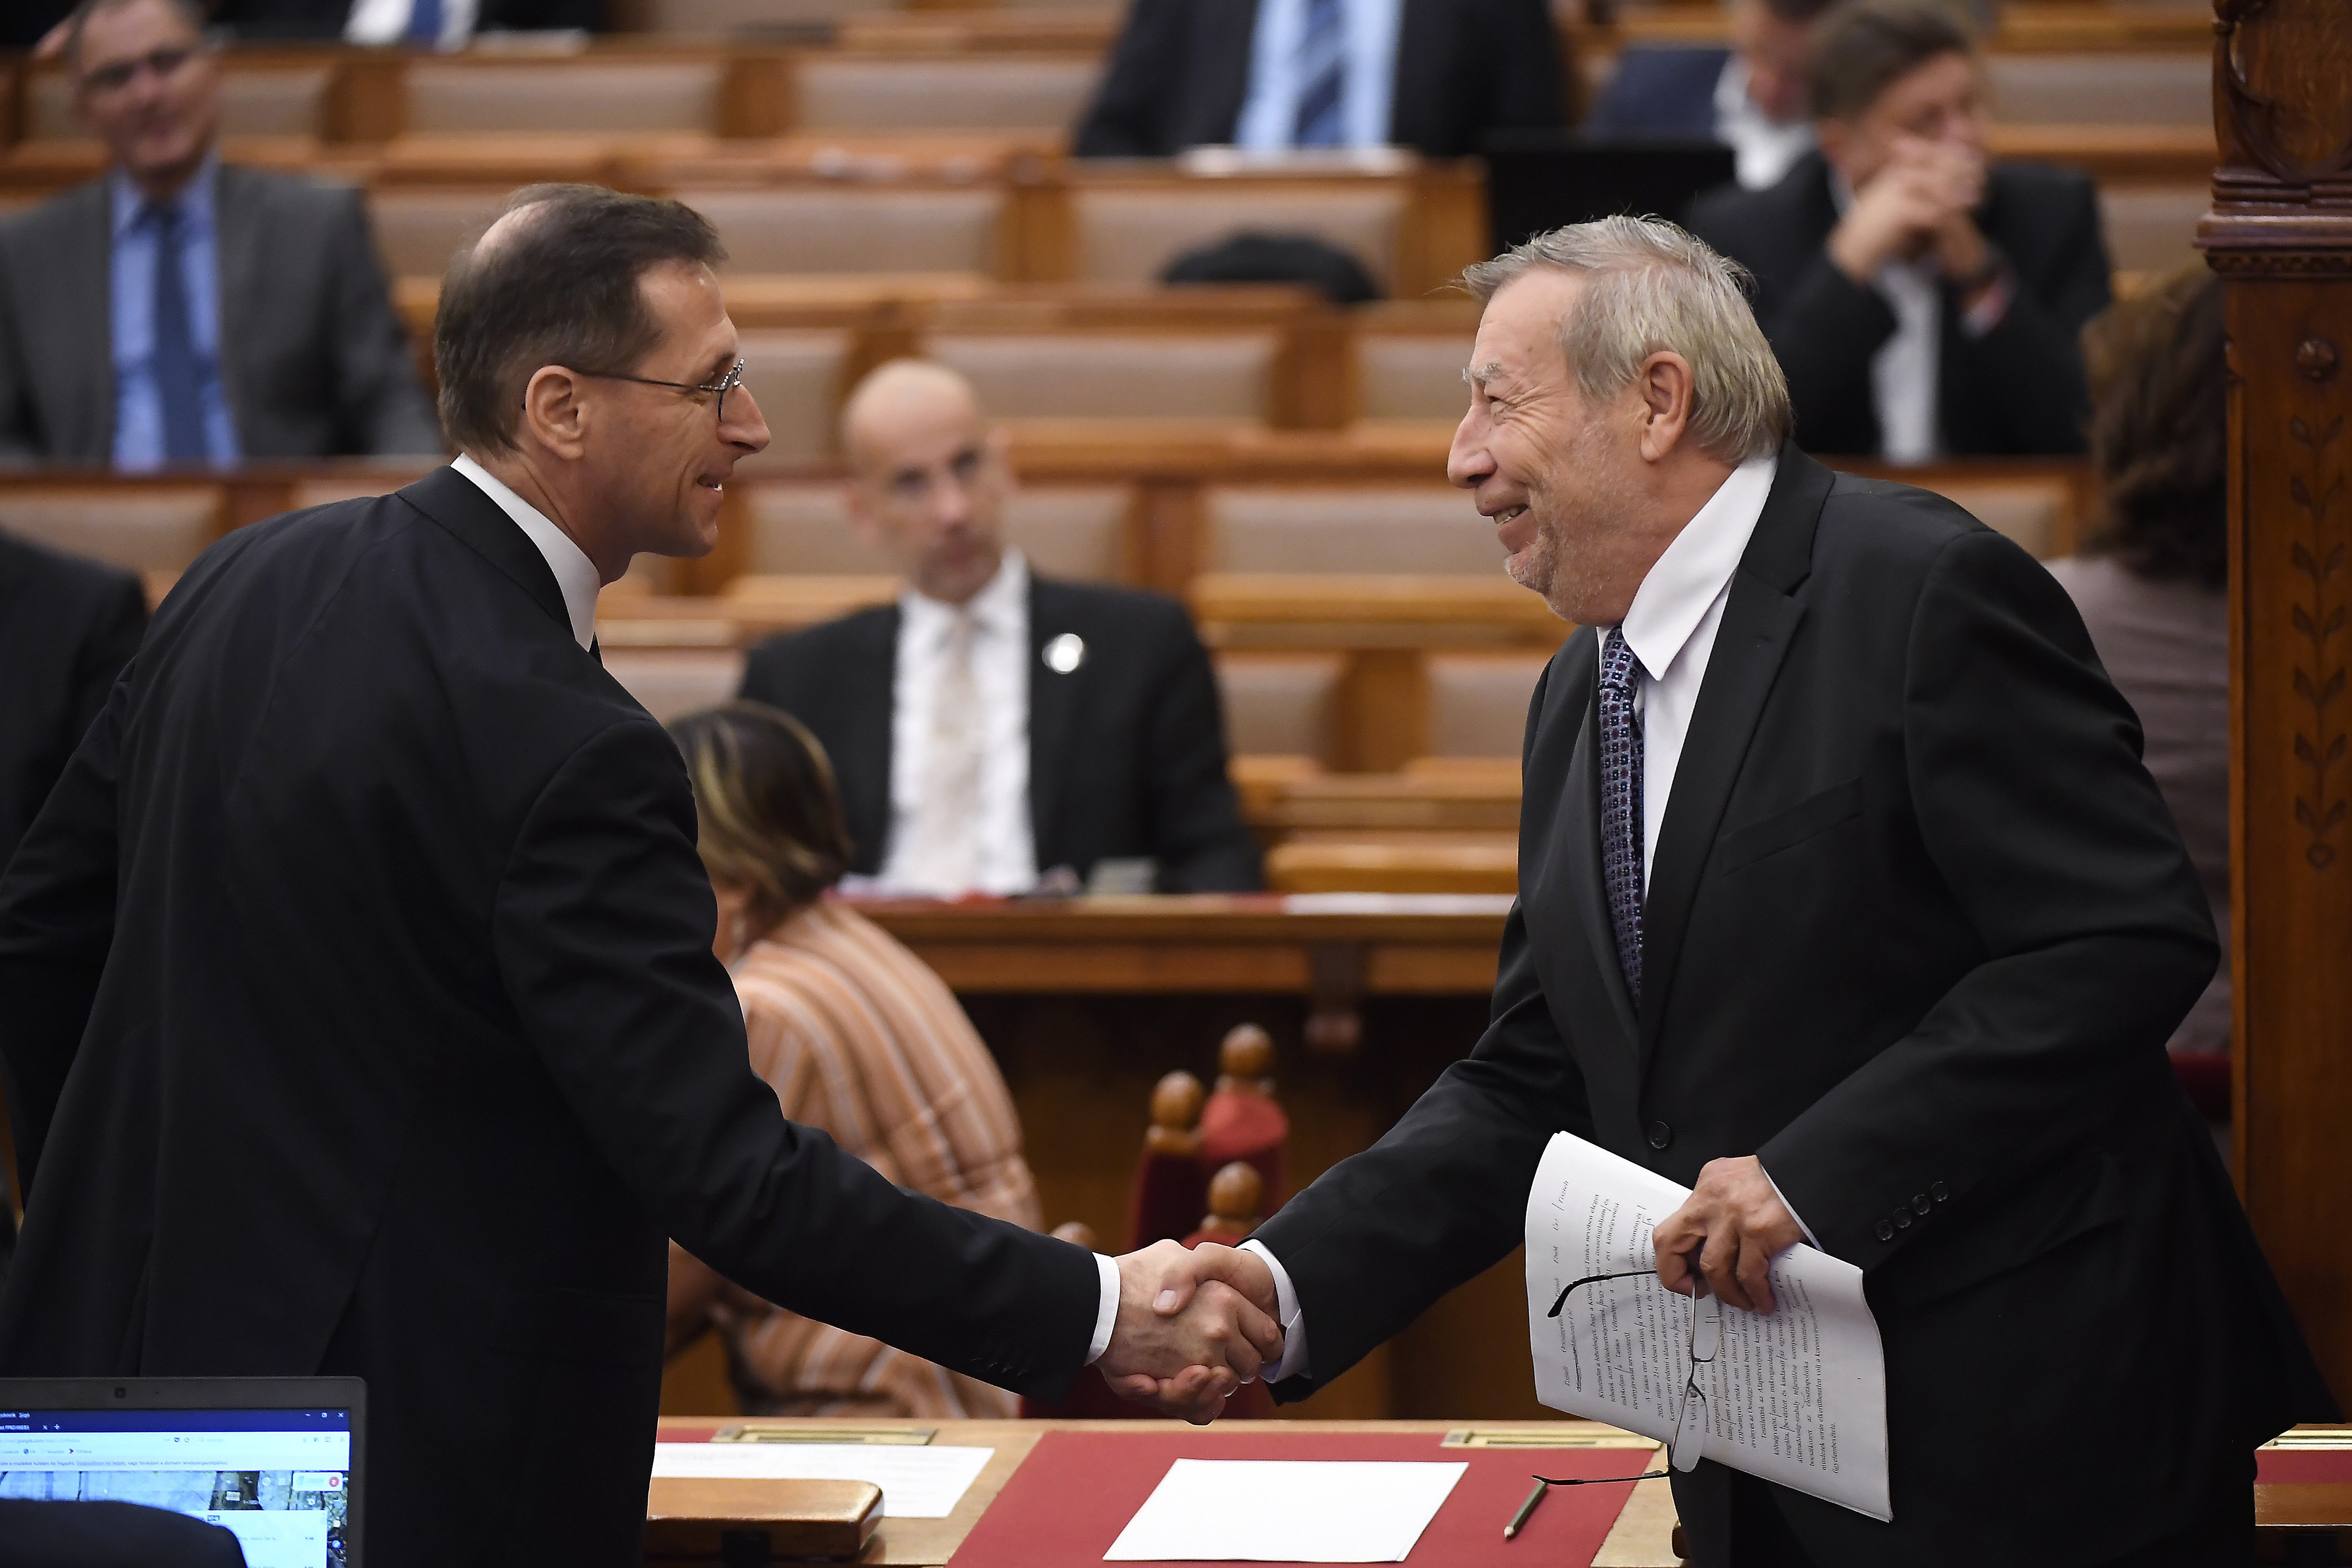 The Budget Board sees significant risks for the Hungarian economy in the next three years